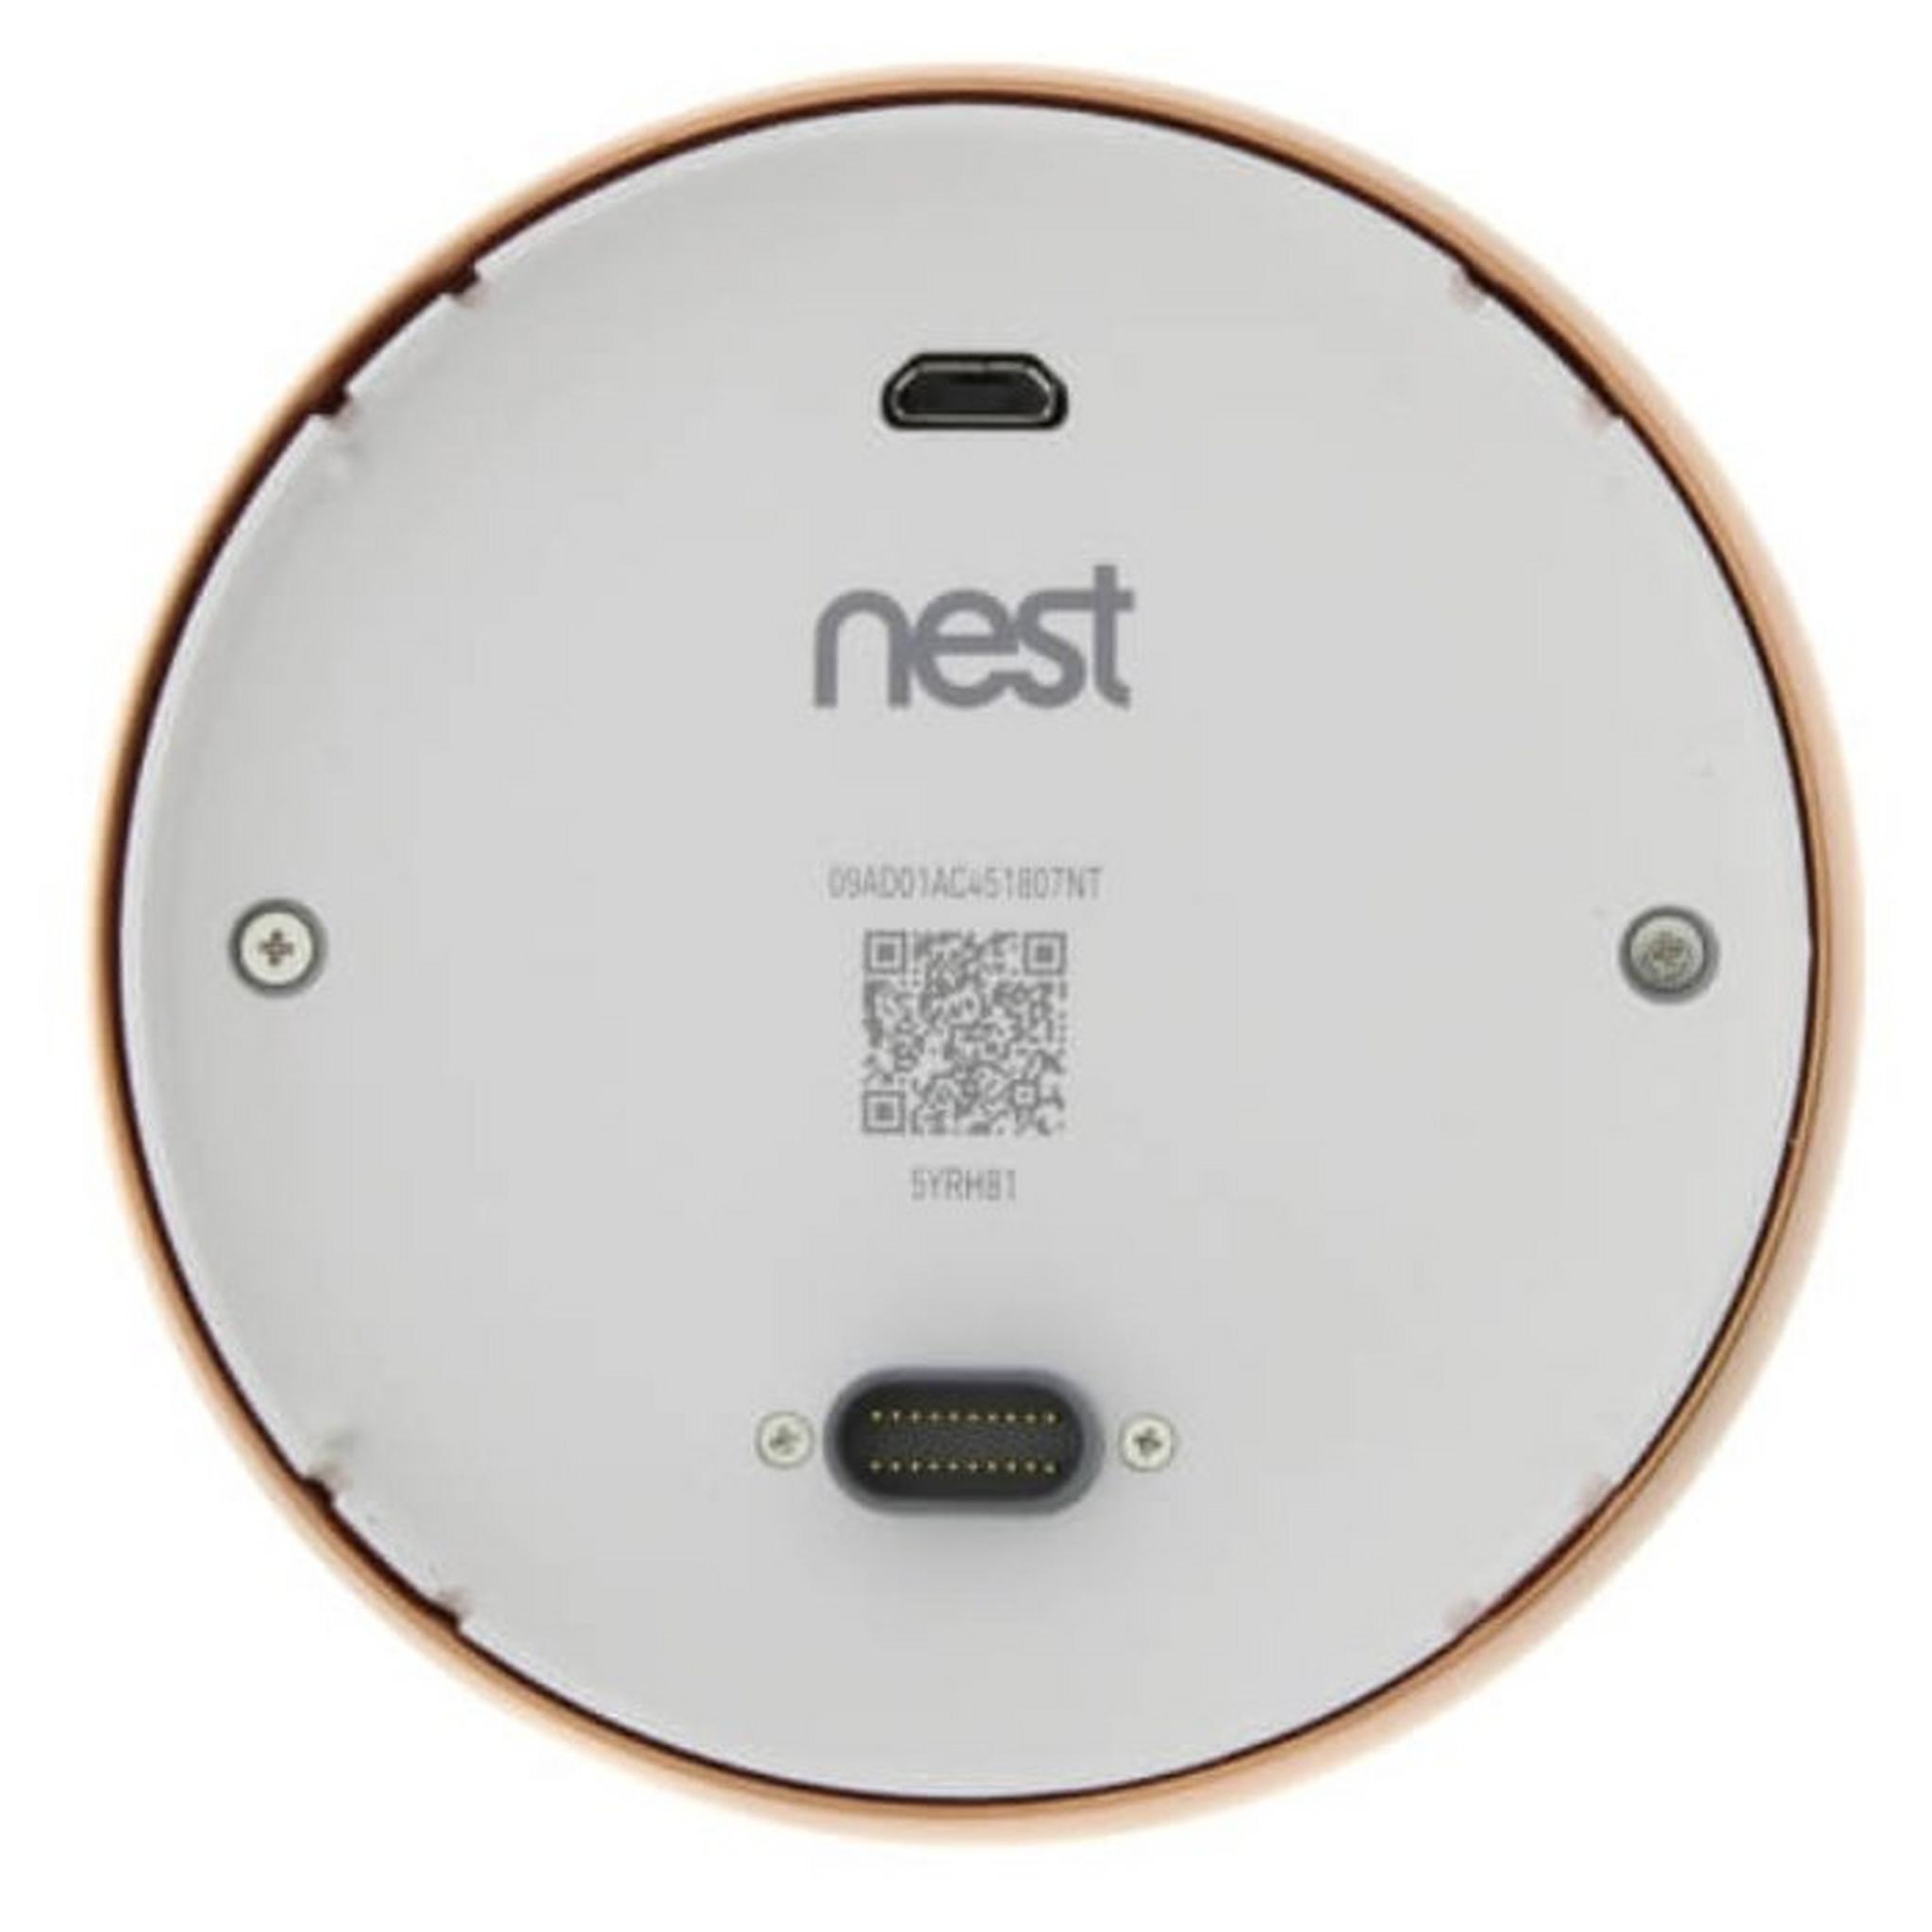 Google Nest Learning Thermostat 3rd Generation - Copper